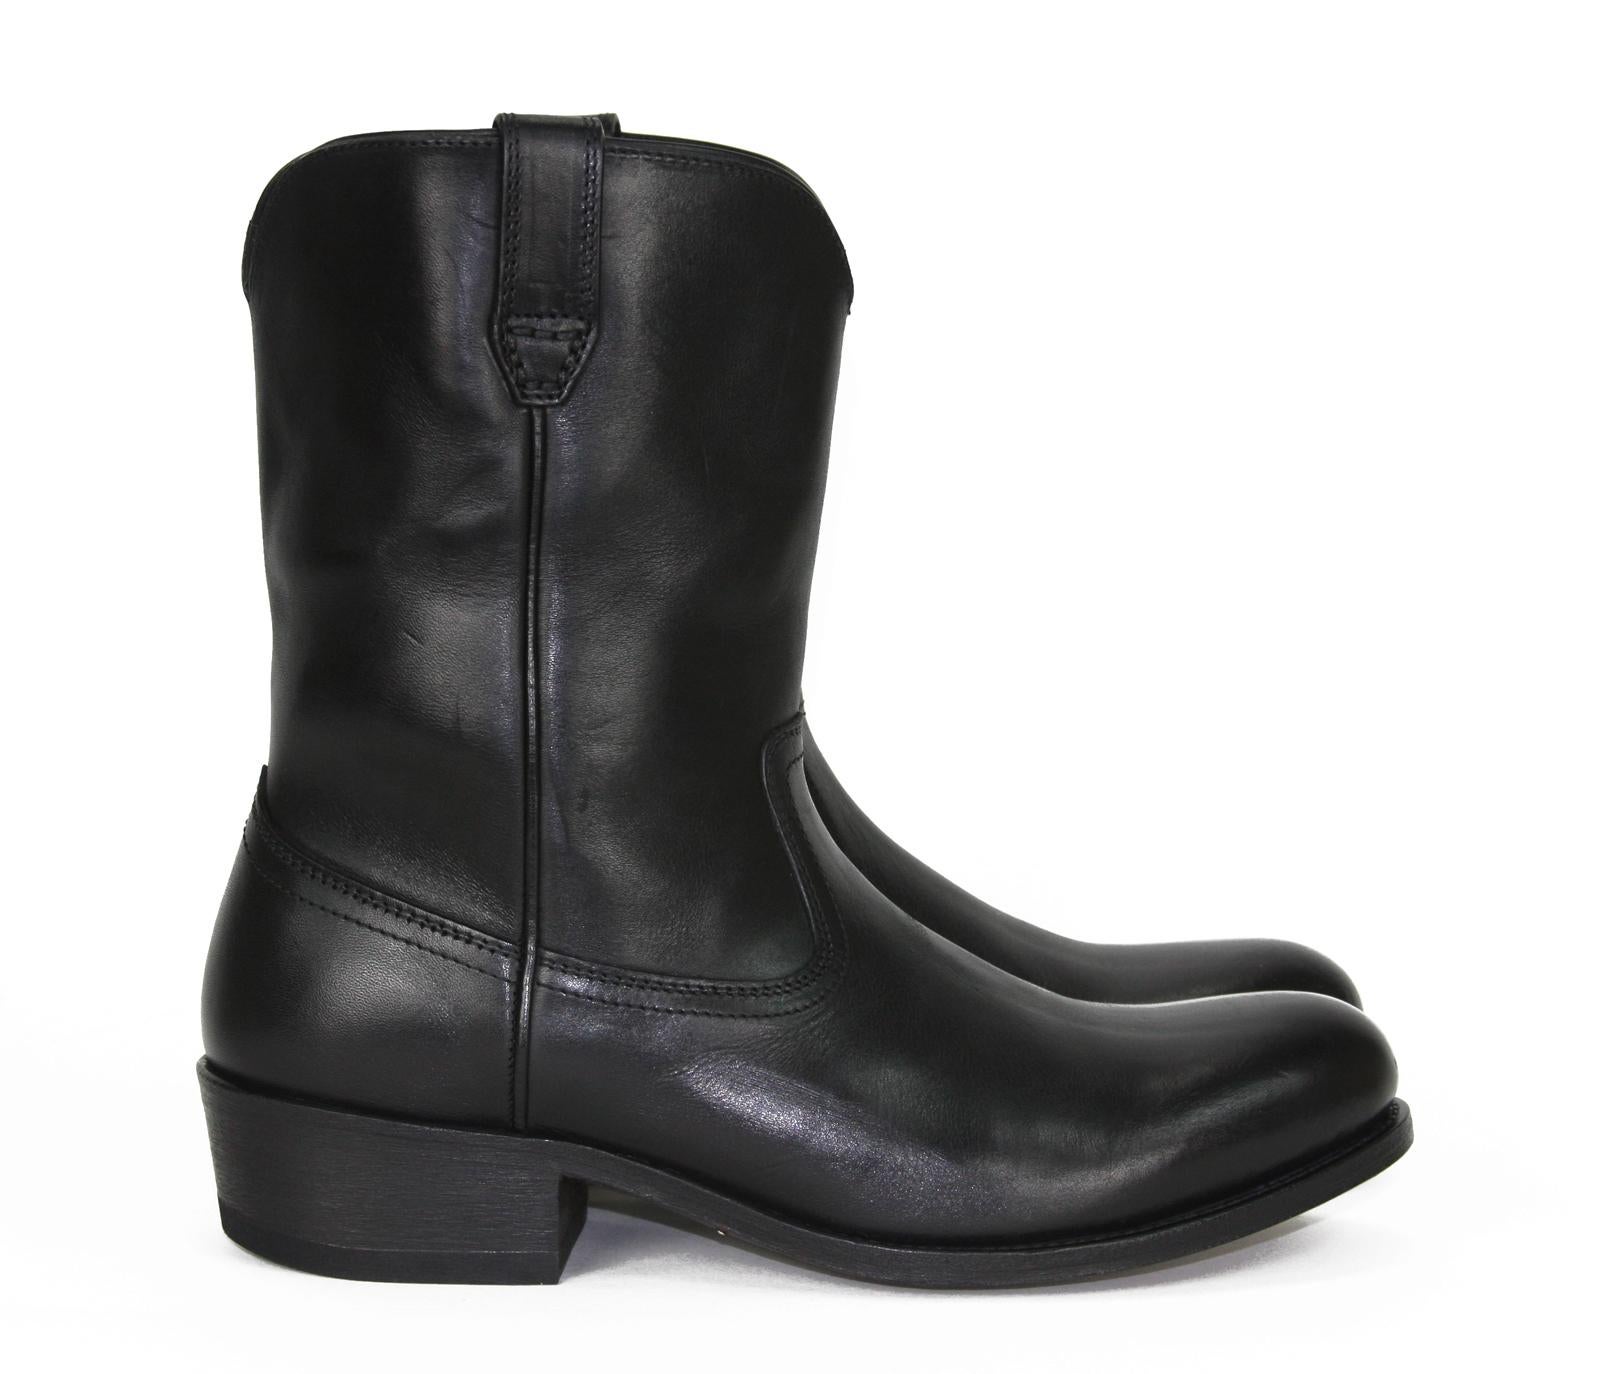 New Tom Ford Men's Western Black Leather Boots
Designer sizes available 8 and 8.5
Calf leather, Top stitched details, Round Toe, Side Pull-Up Loops, 
Leather lining and insole, Leather Sole.
Flat stacked heel - 1.5 inches, Shaft - 9 inches.
Retail